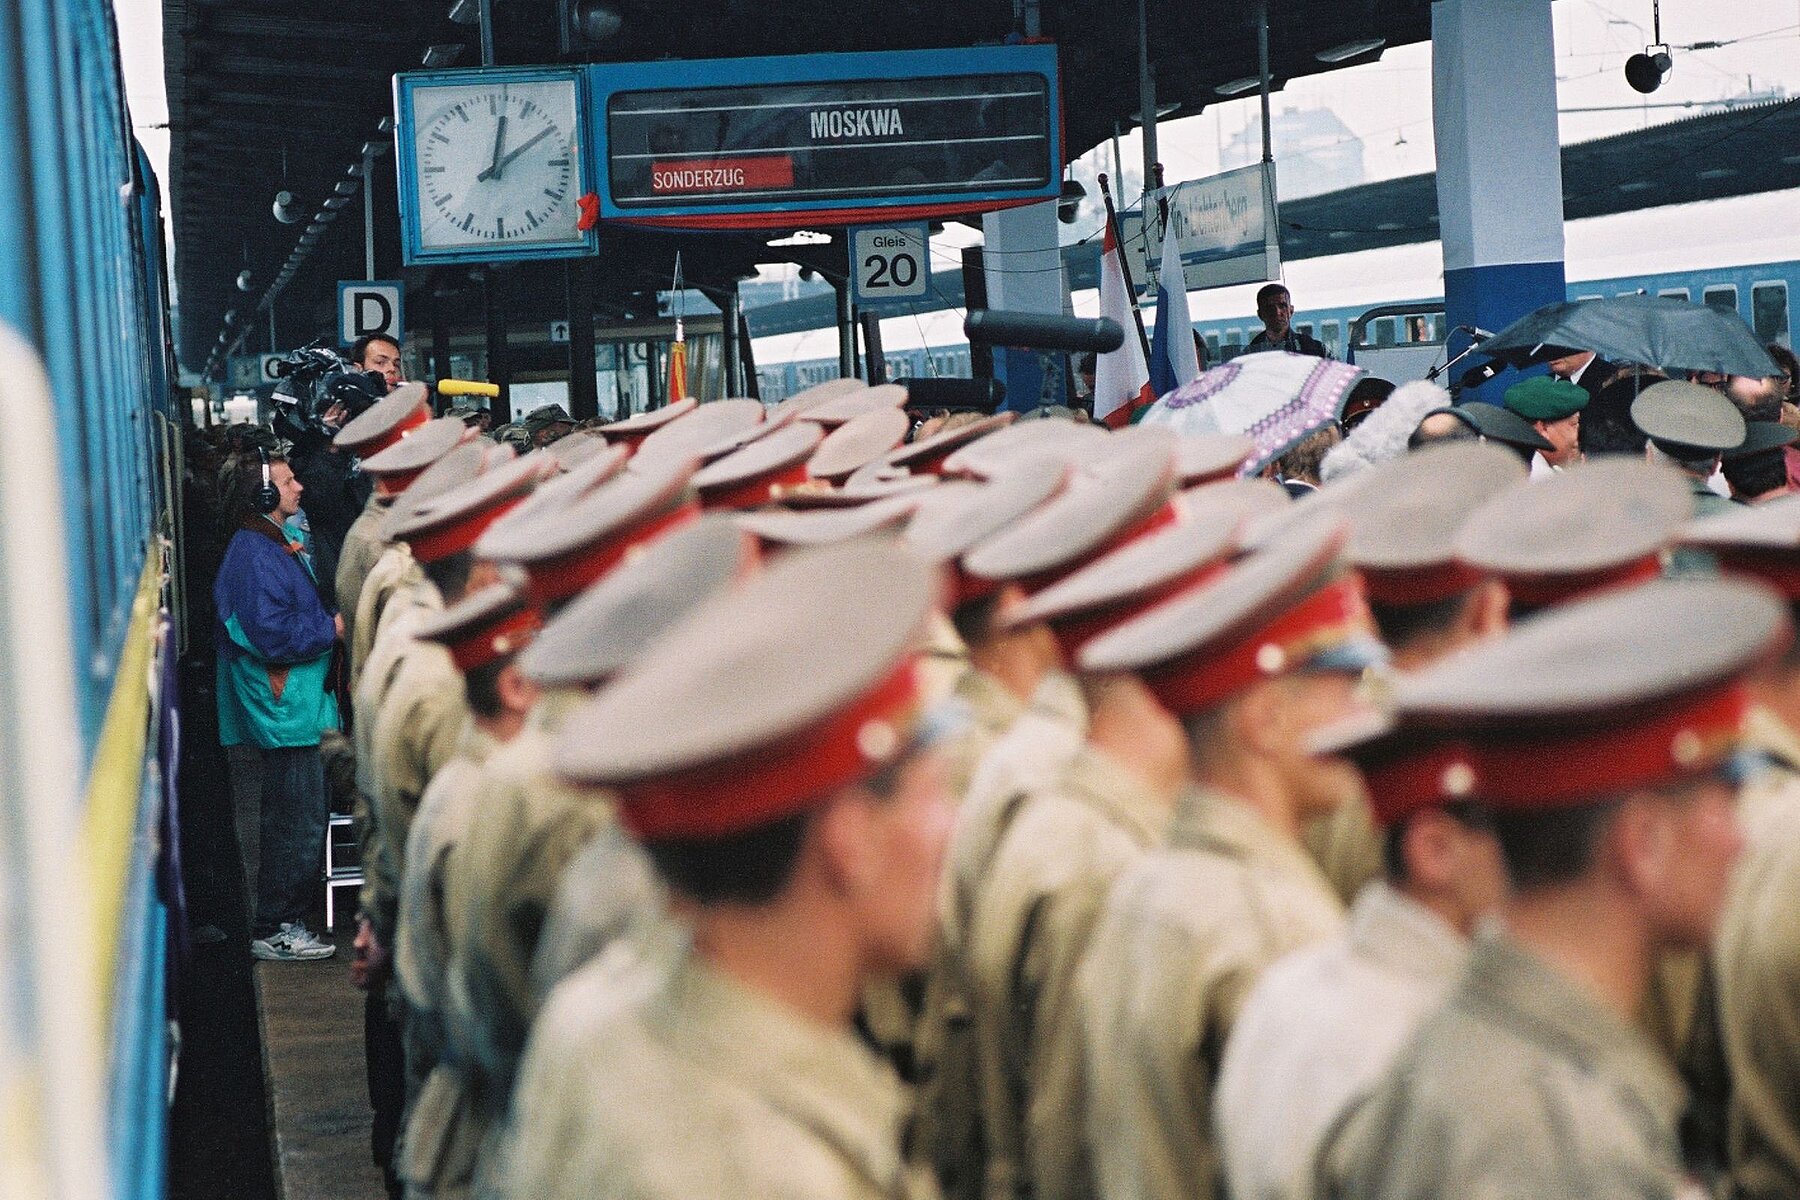 Soldiers in khaki uniform shirts with black and red caps stand on a platform. Above them is a display board with a clock.